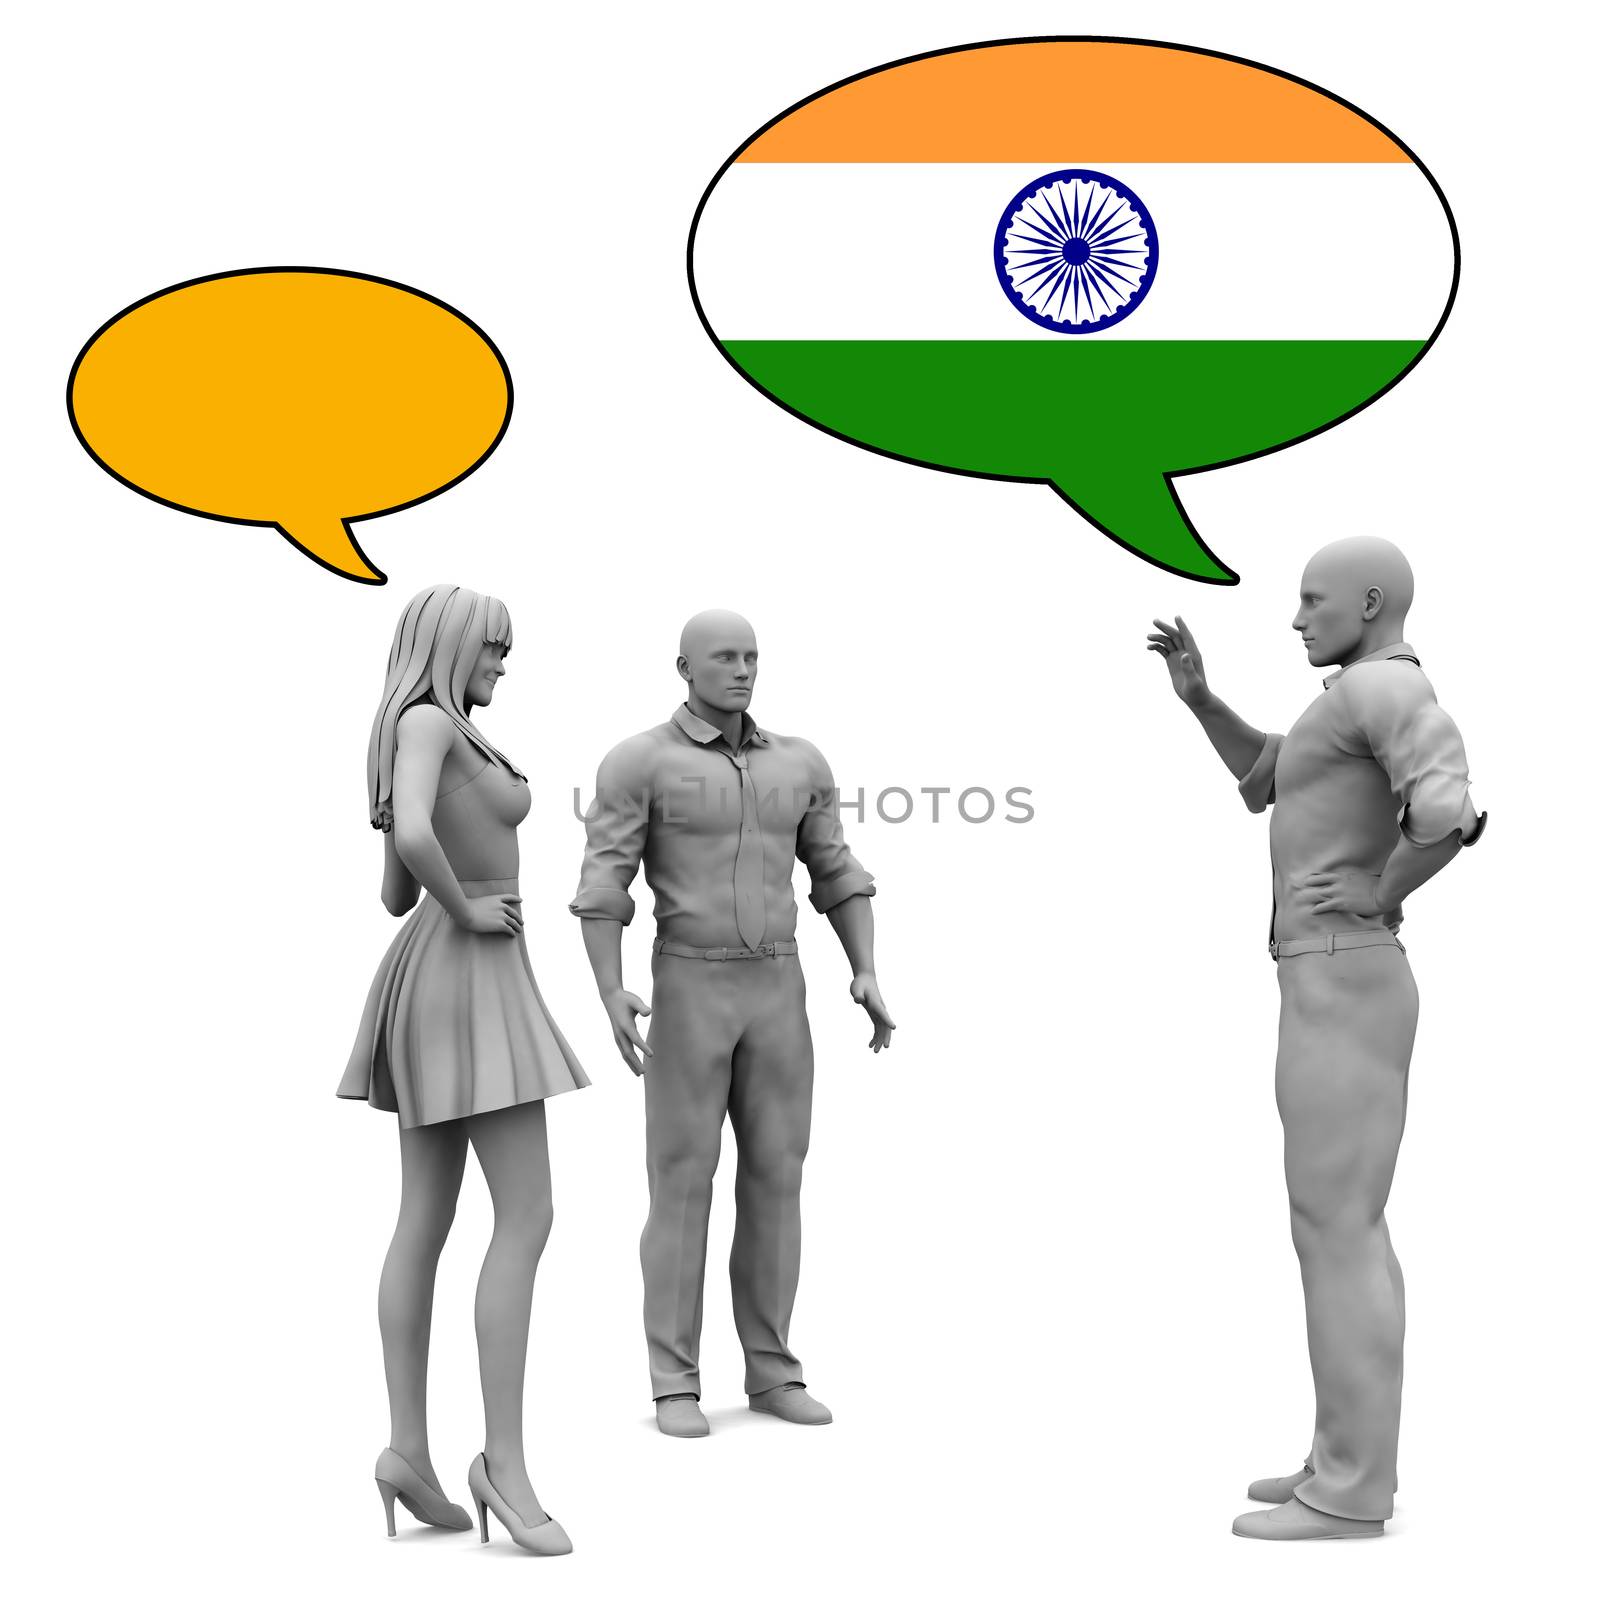 Learn Indian Culture and Language to Communicate